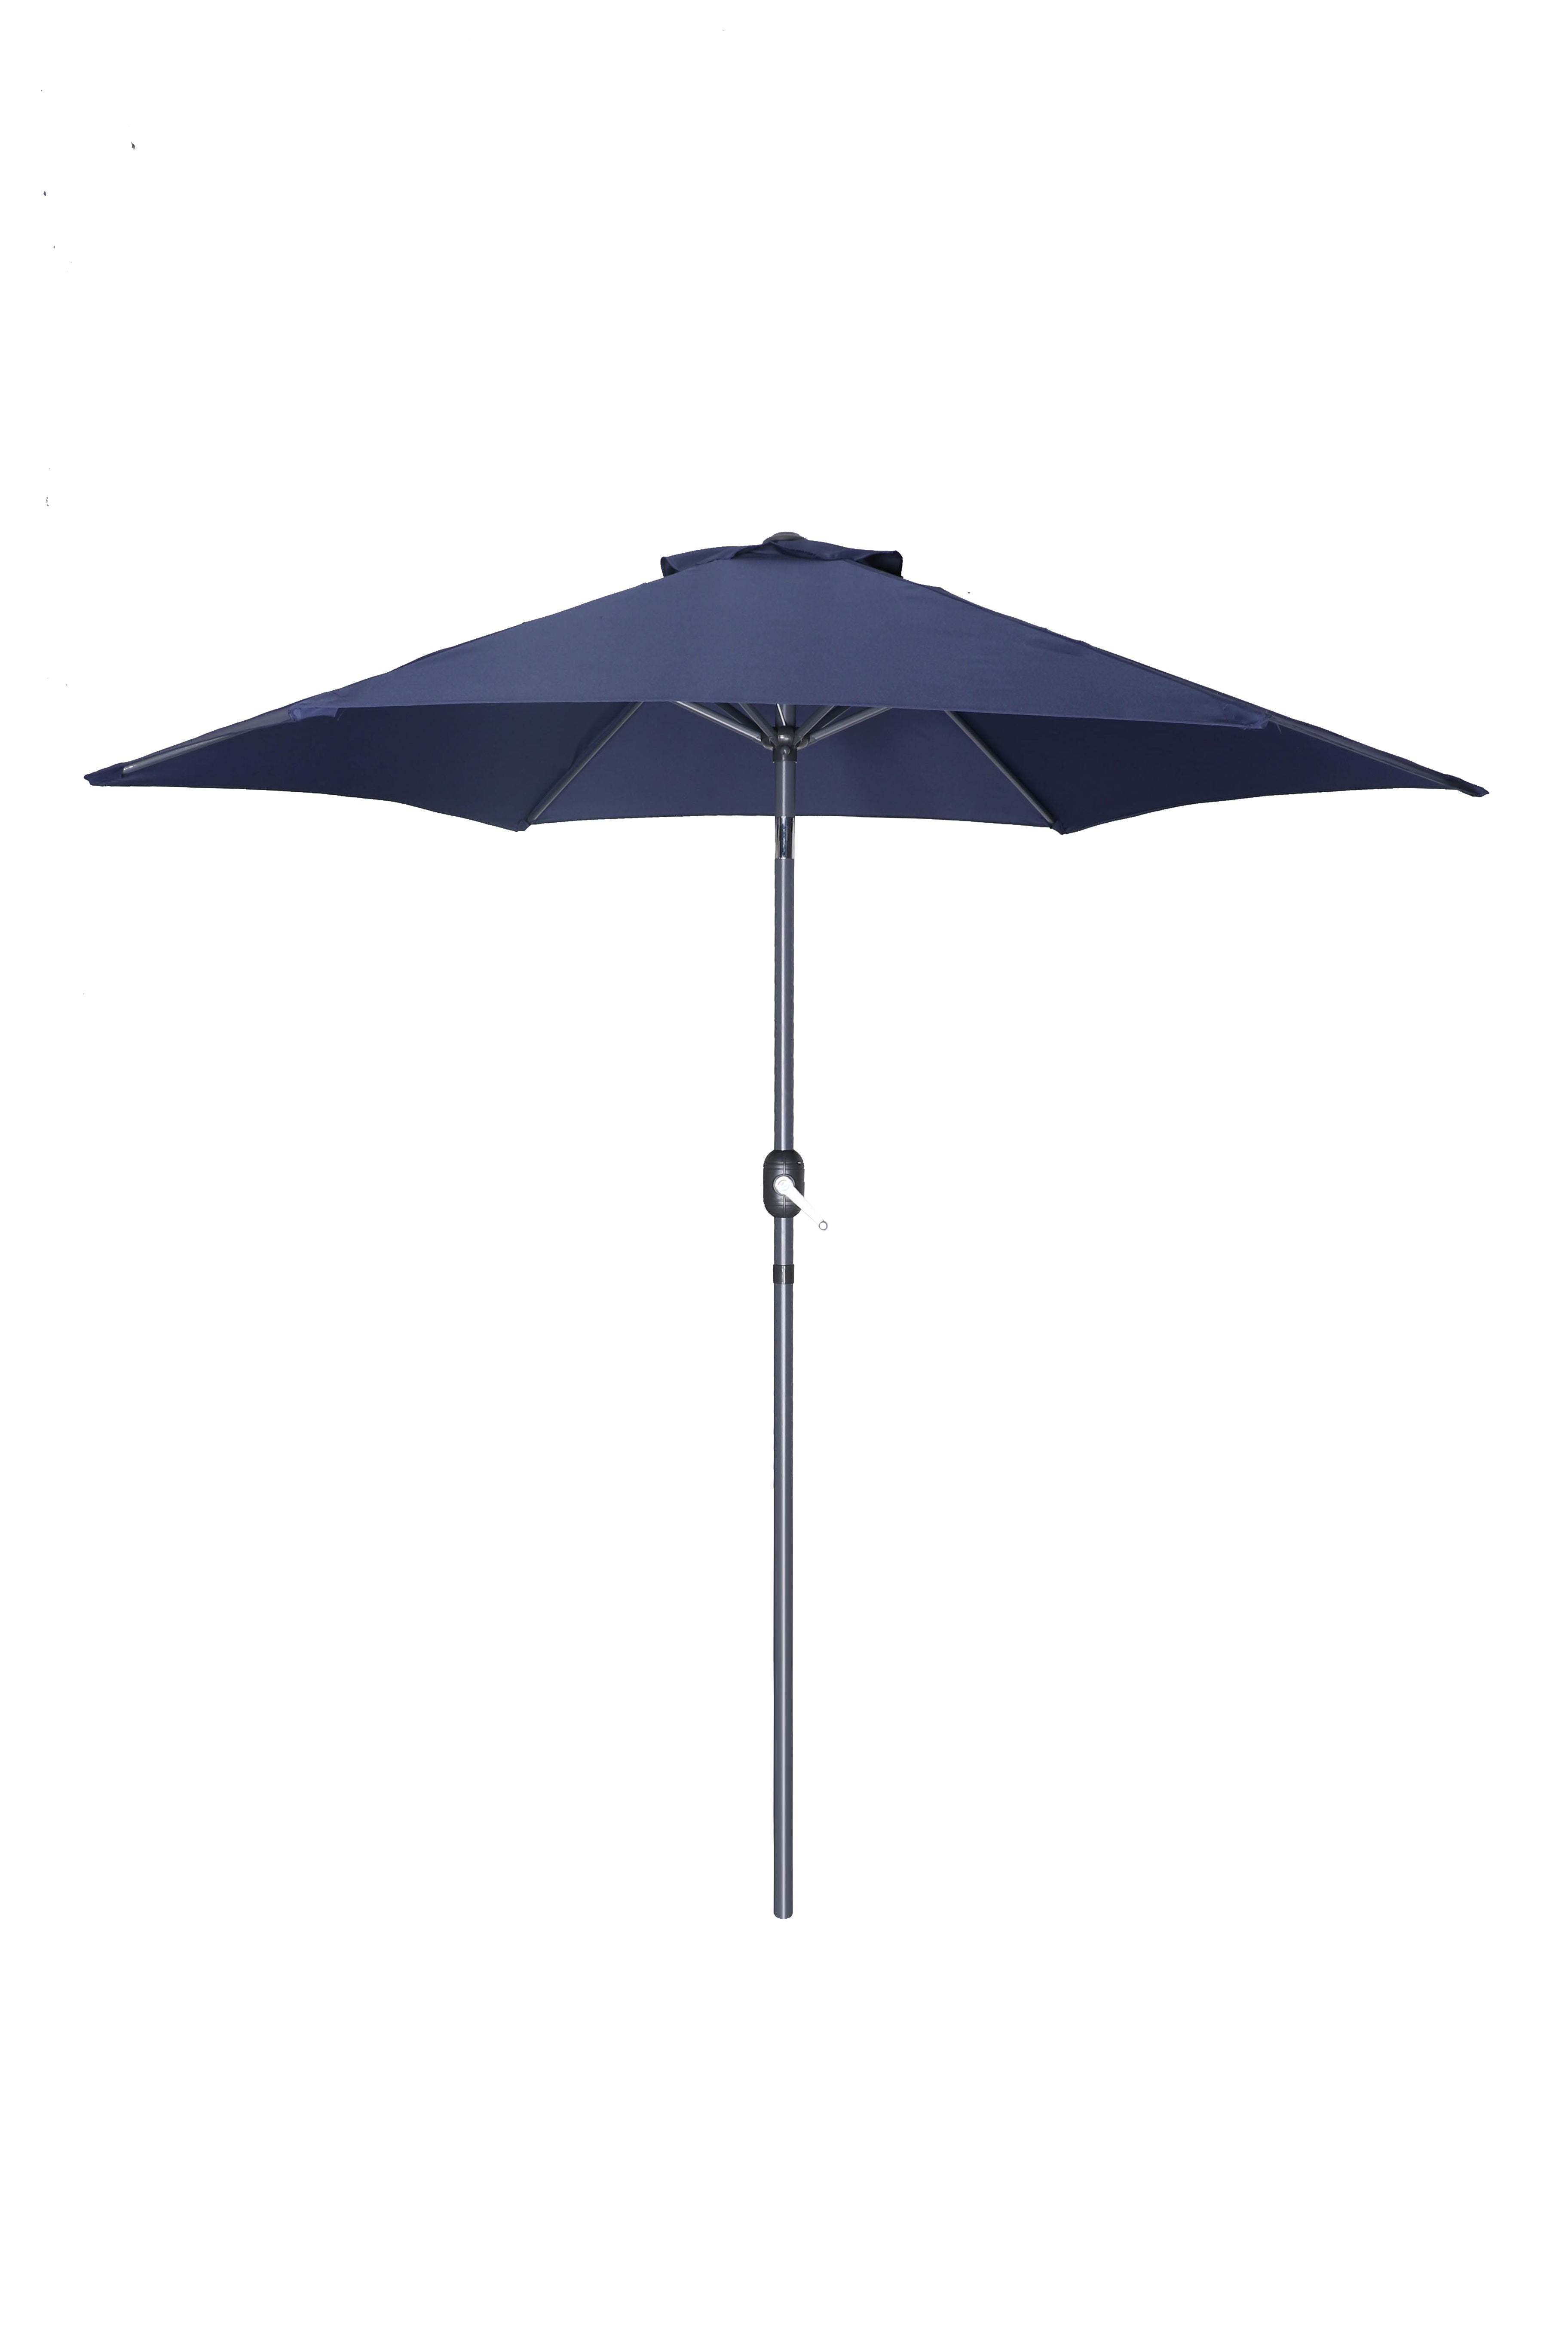 PatioZone 9' Tilting Market Umbrella (Cover Incl.) in UV-Protected Polyester (MOSS-T1204NB) - Nautical Blue